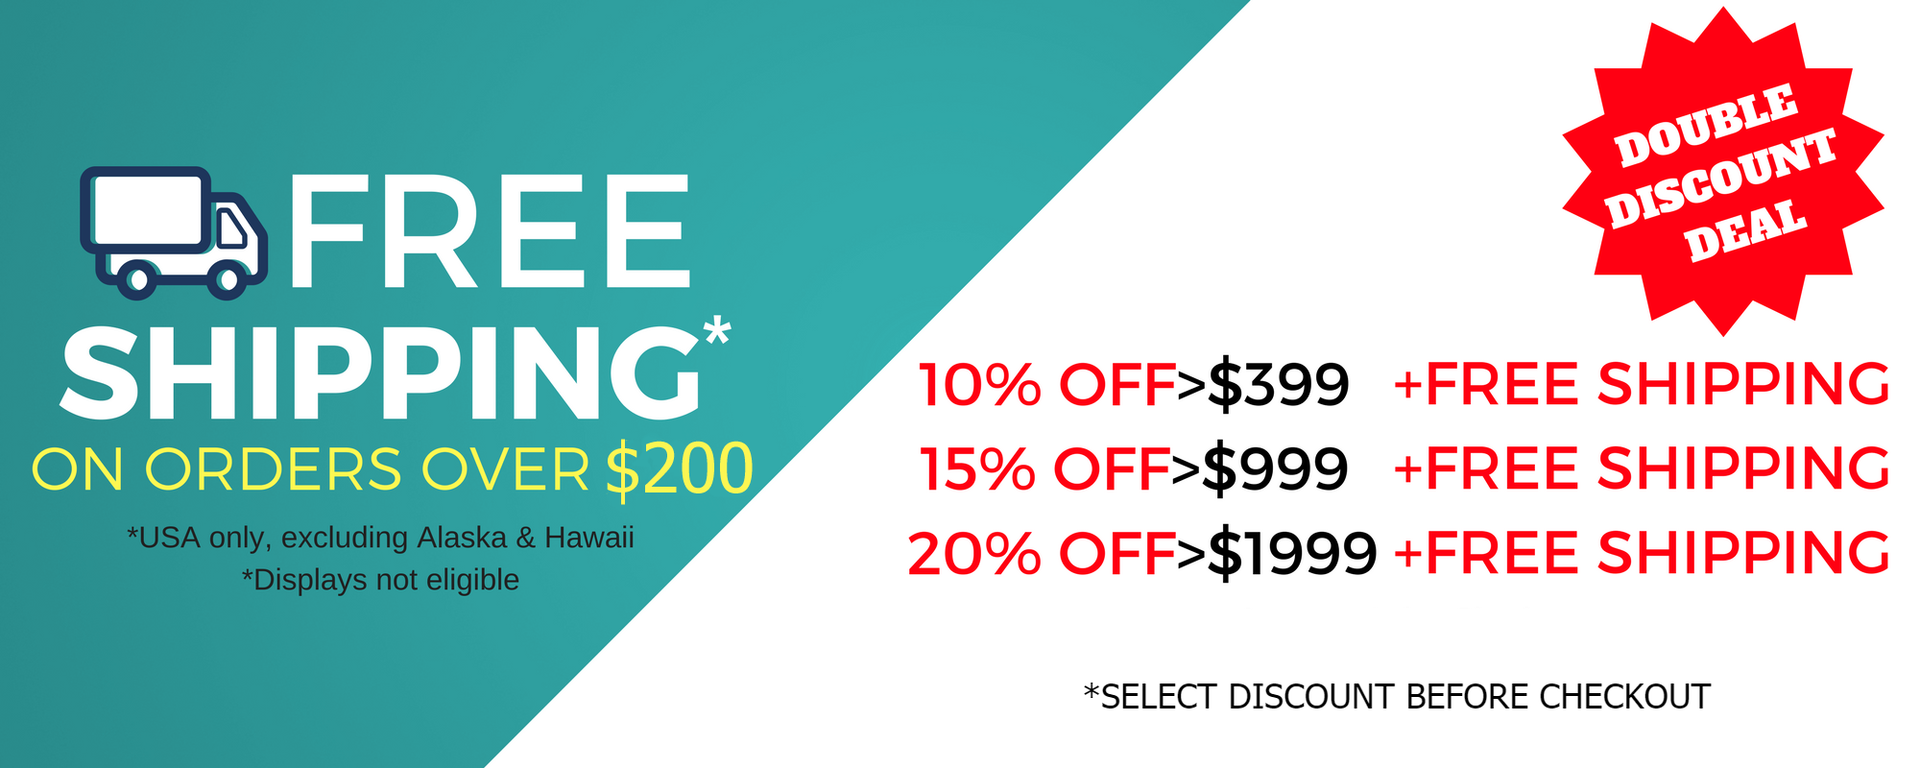 E FOCUS OFFERS FREE SHIPPING OVER $200 AND TIERED DISCOUNTS PER BULK ORDER.